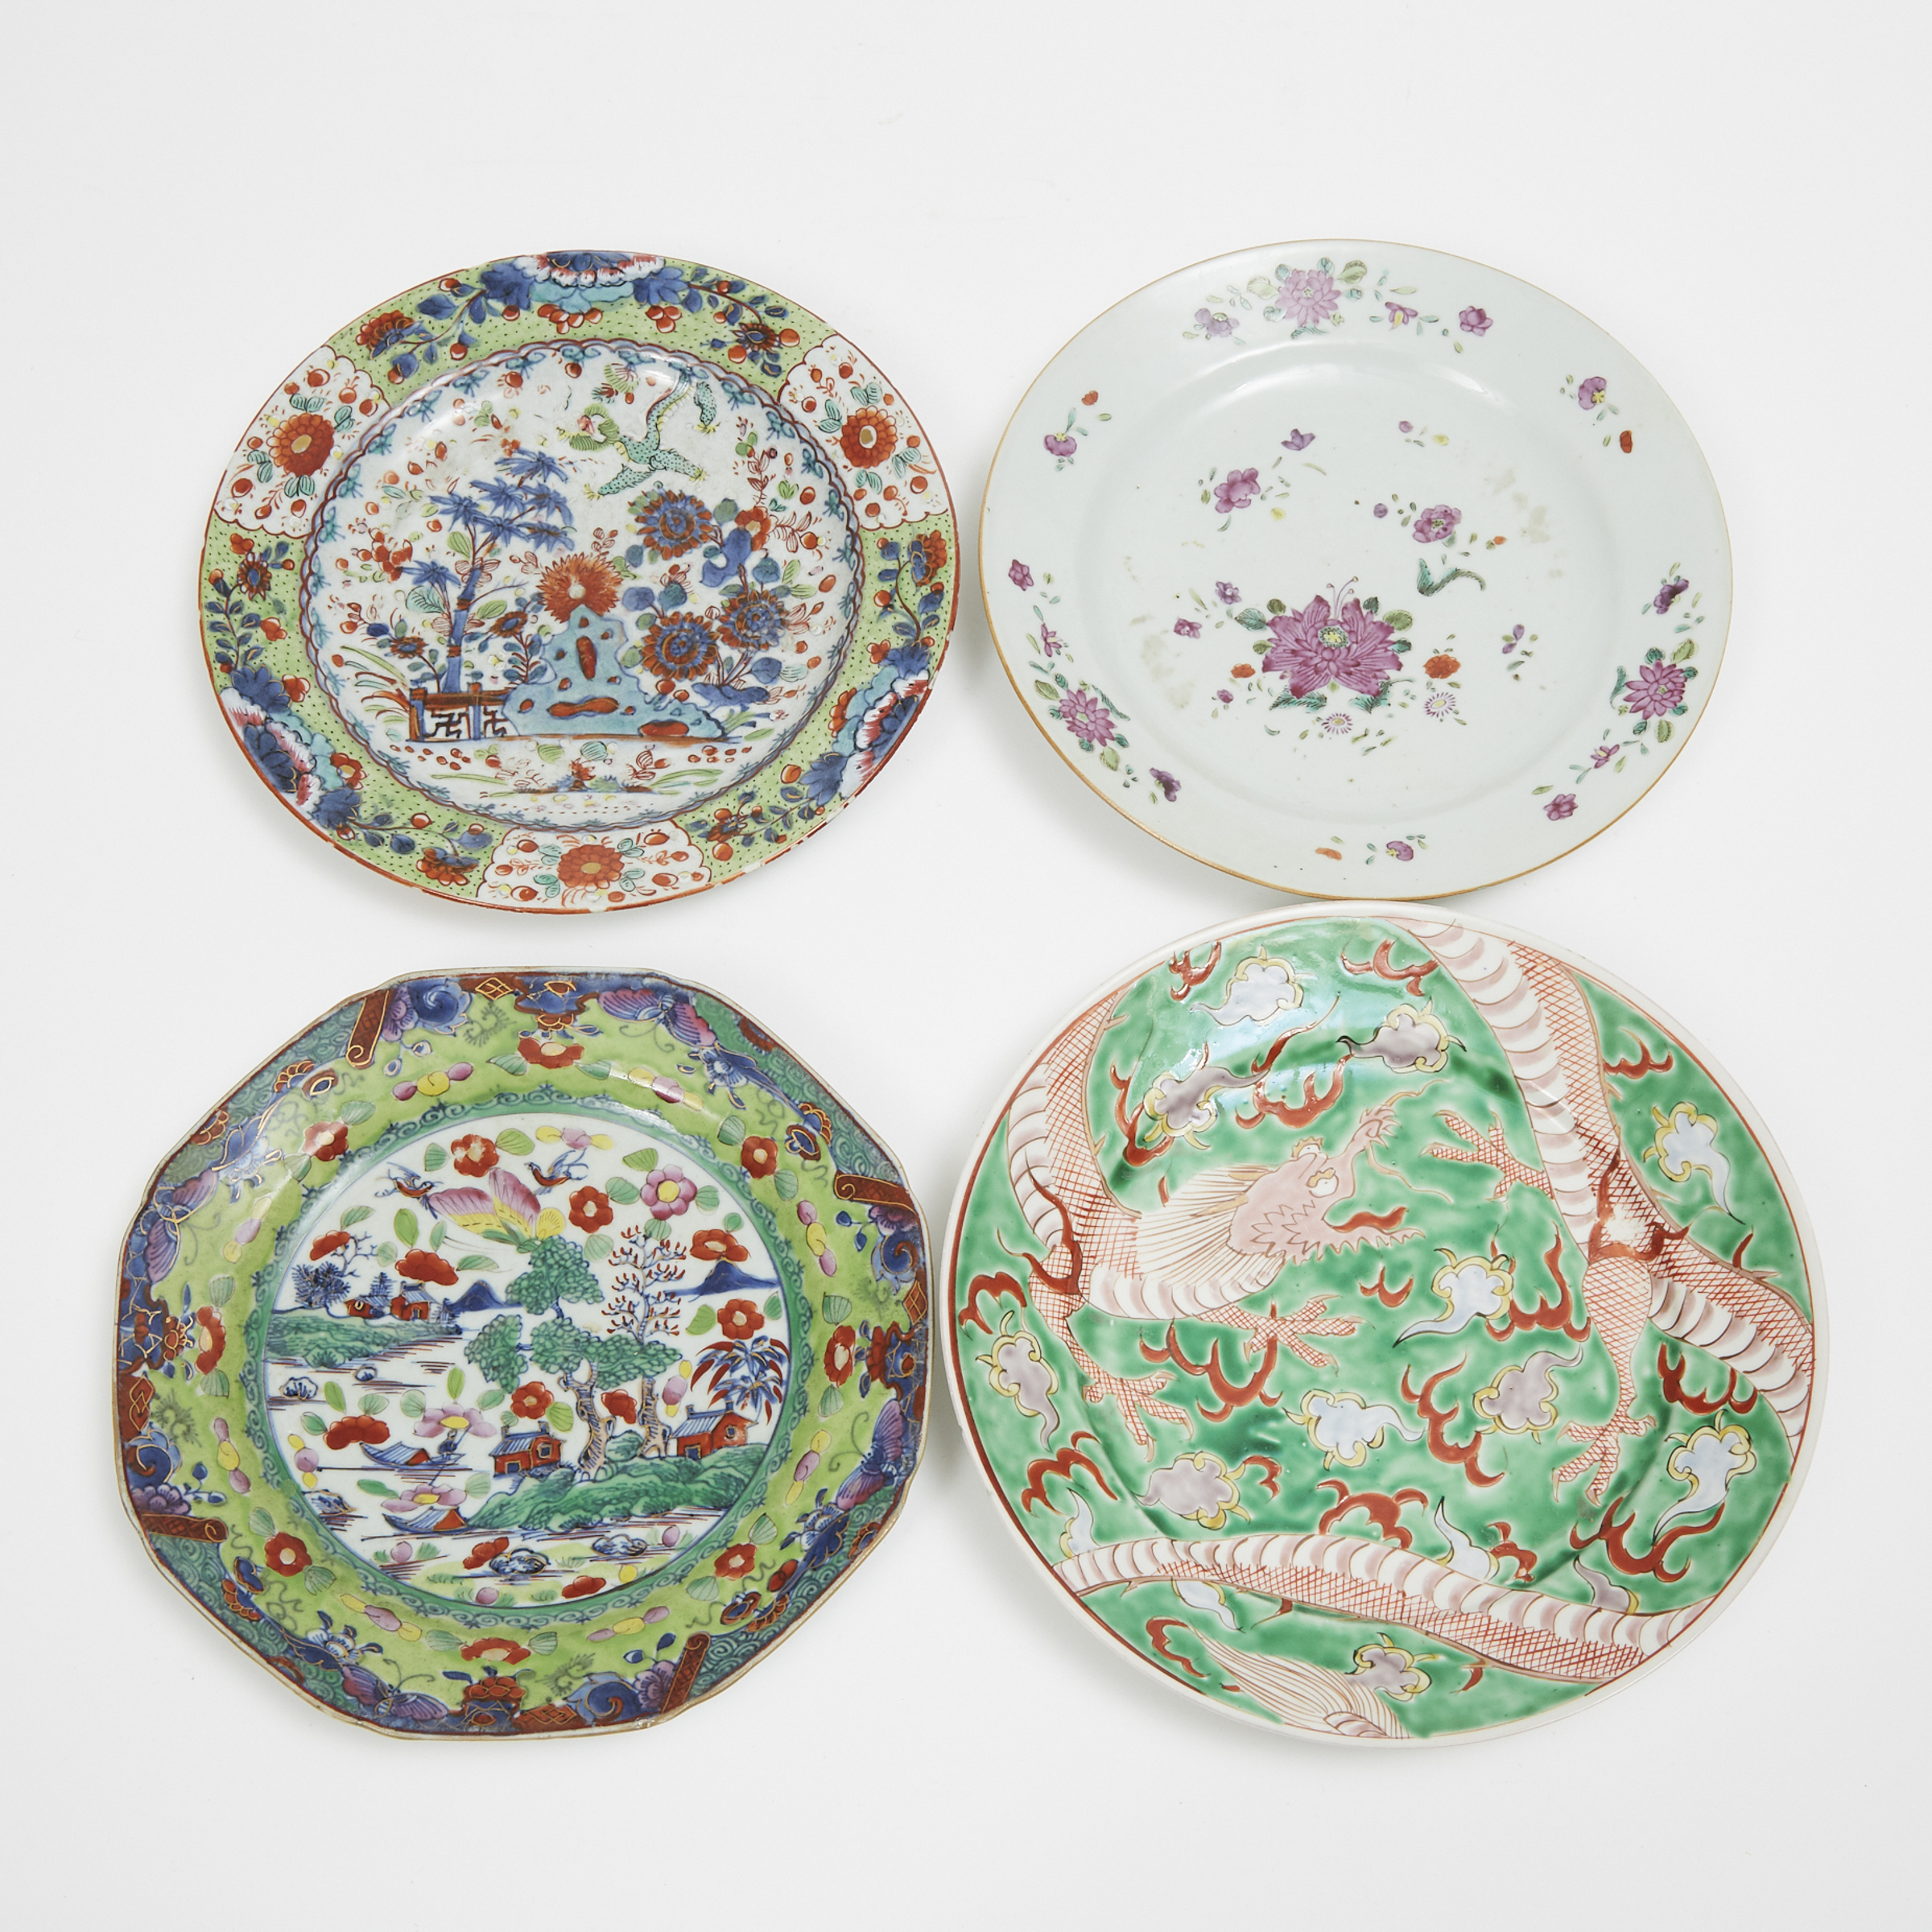 A Group of Four Famille Rose Dishes, Qing Dynasty 